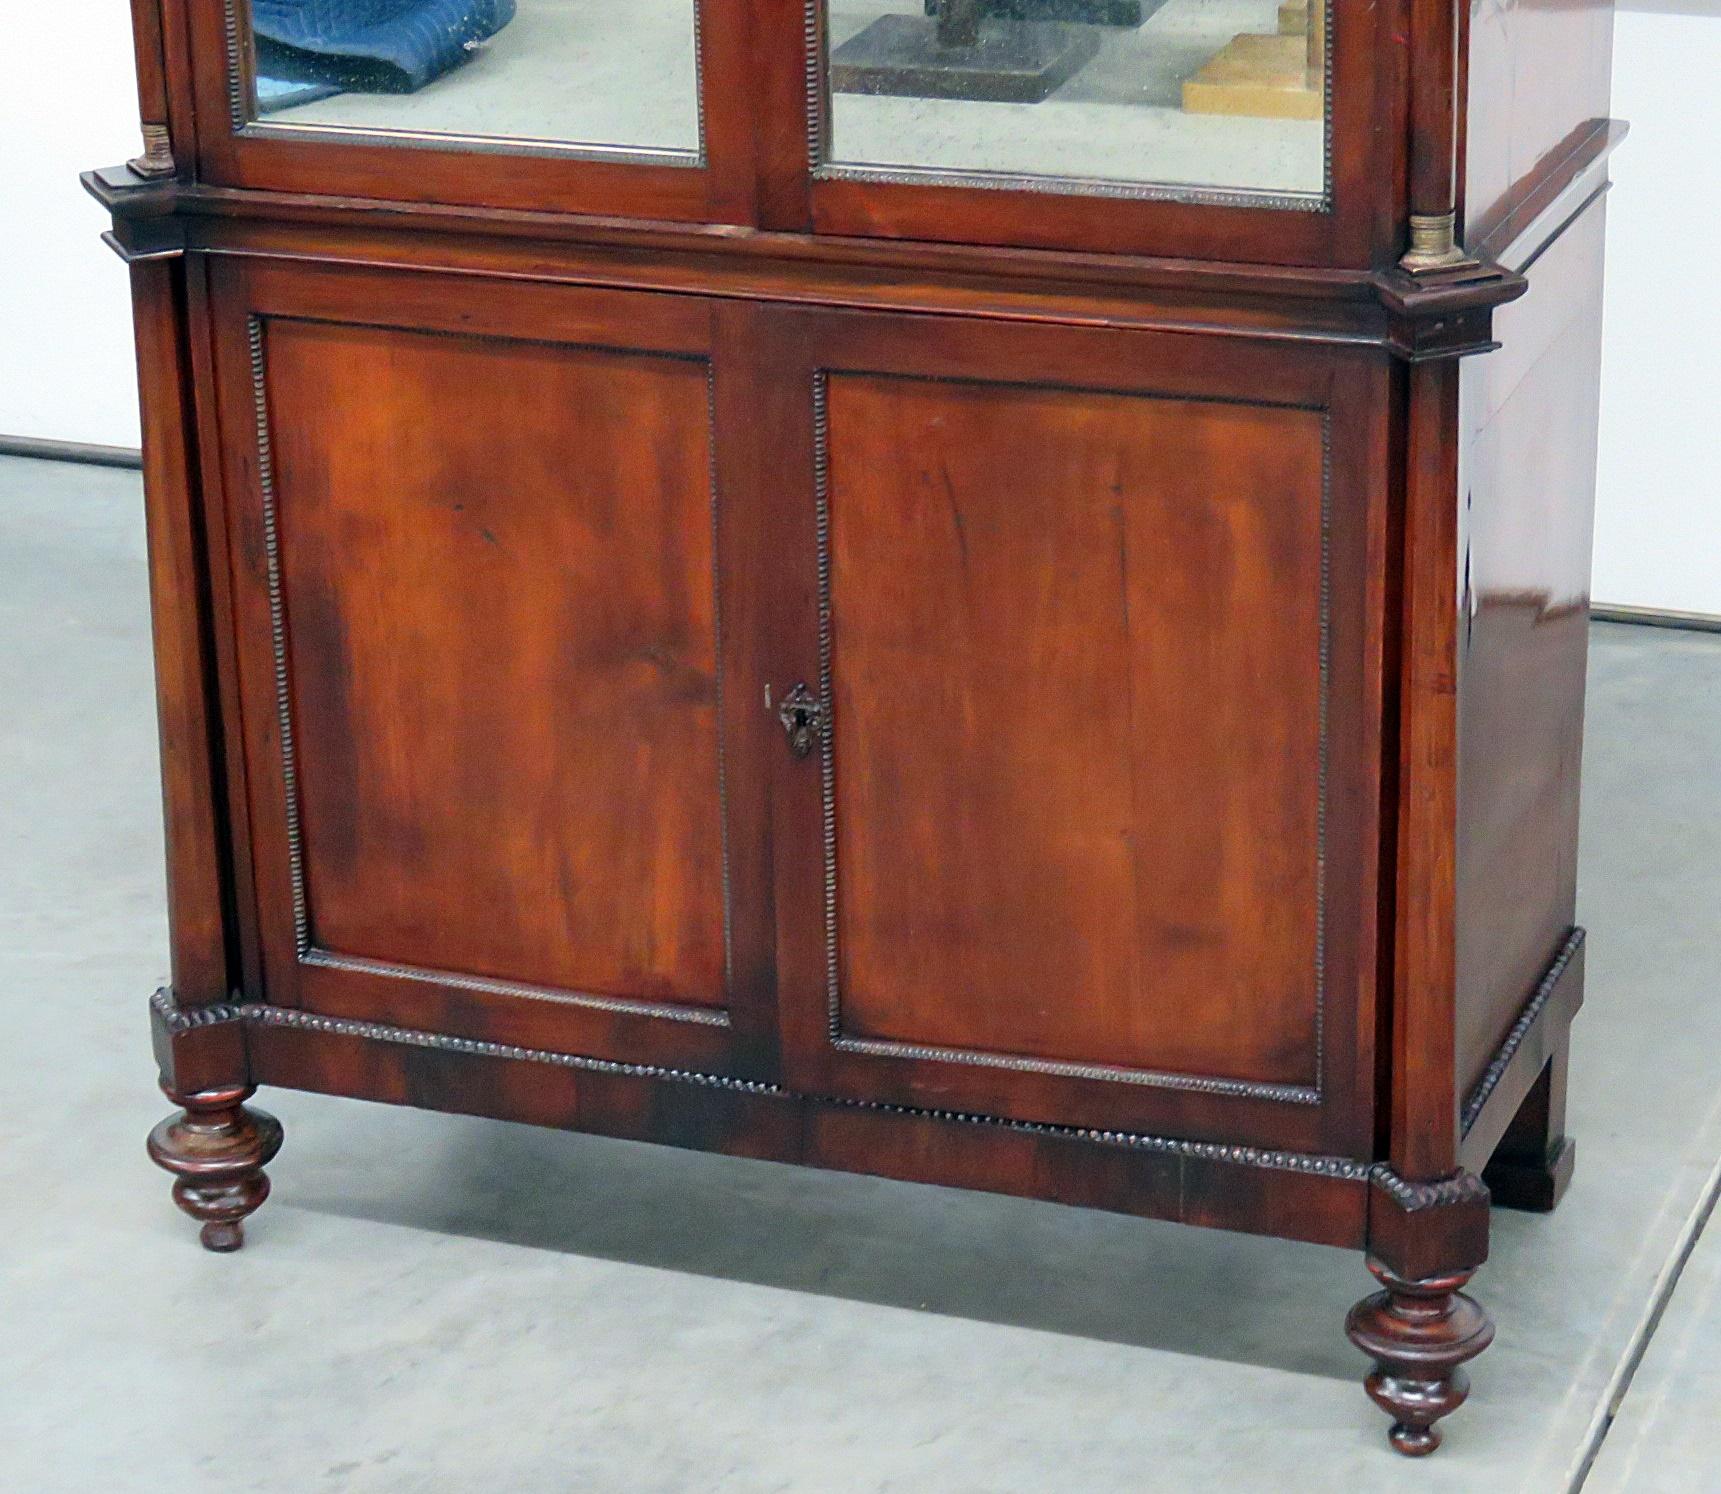 Italian Directoire style bronze mounted marble-top cabinet with 2 doors (with distressed mirrors) containing 2 shelves over 2 doors.